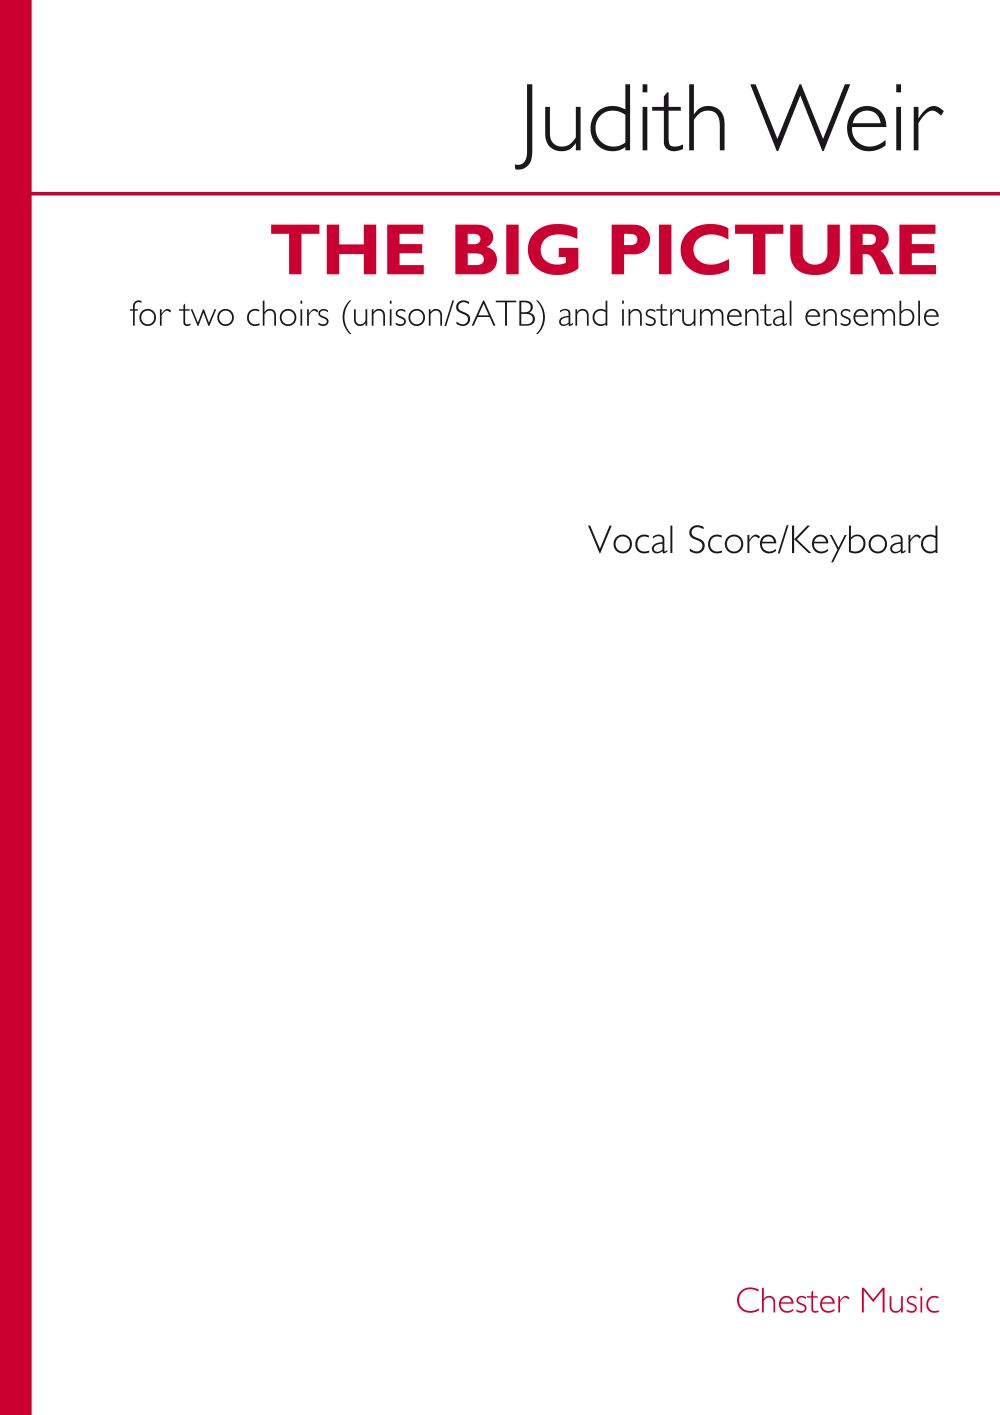 Judith Weir: The Big Picture (Vocal Score/Keyboard): Mixed Choir: Vocal Score